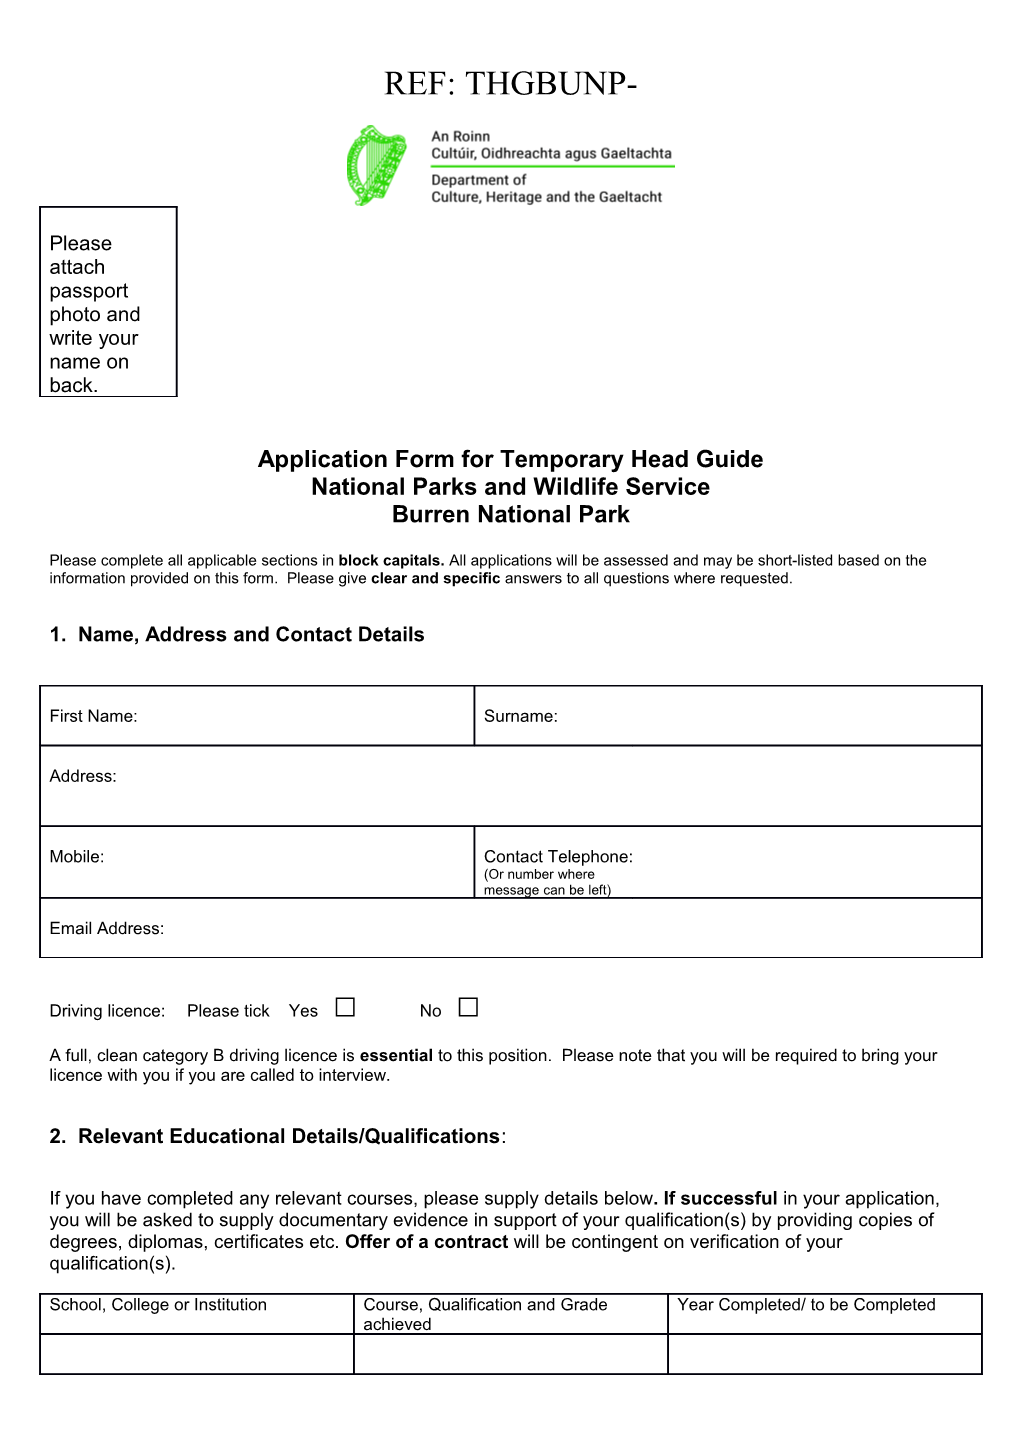 Application Form for Temporary Head Guide